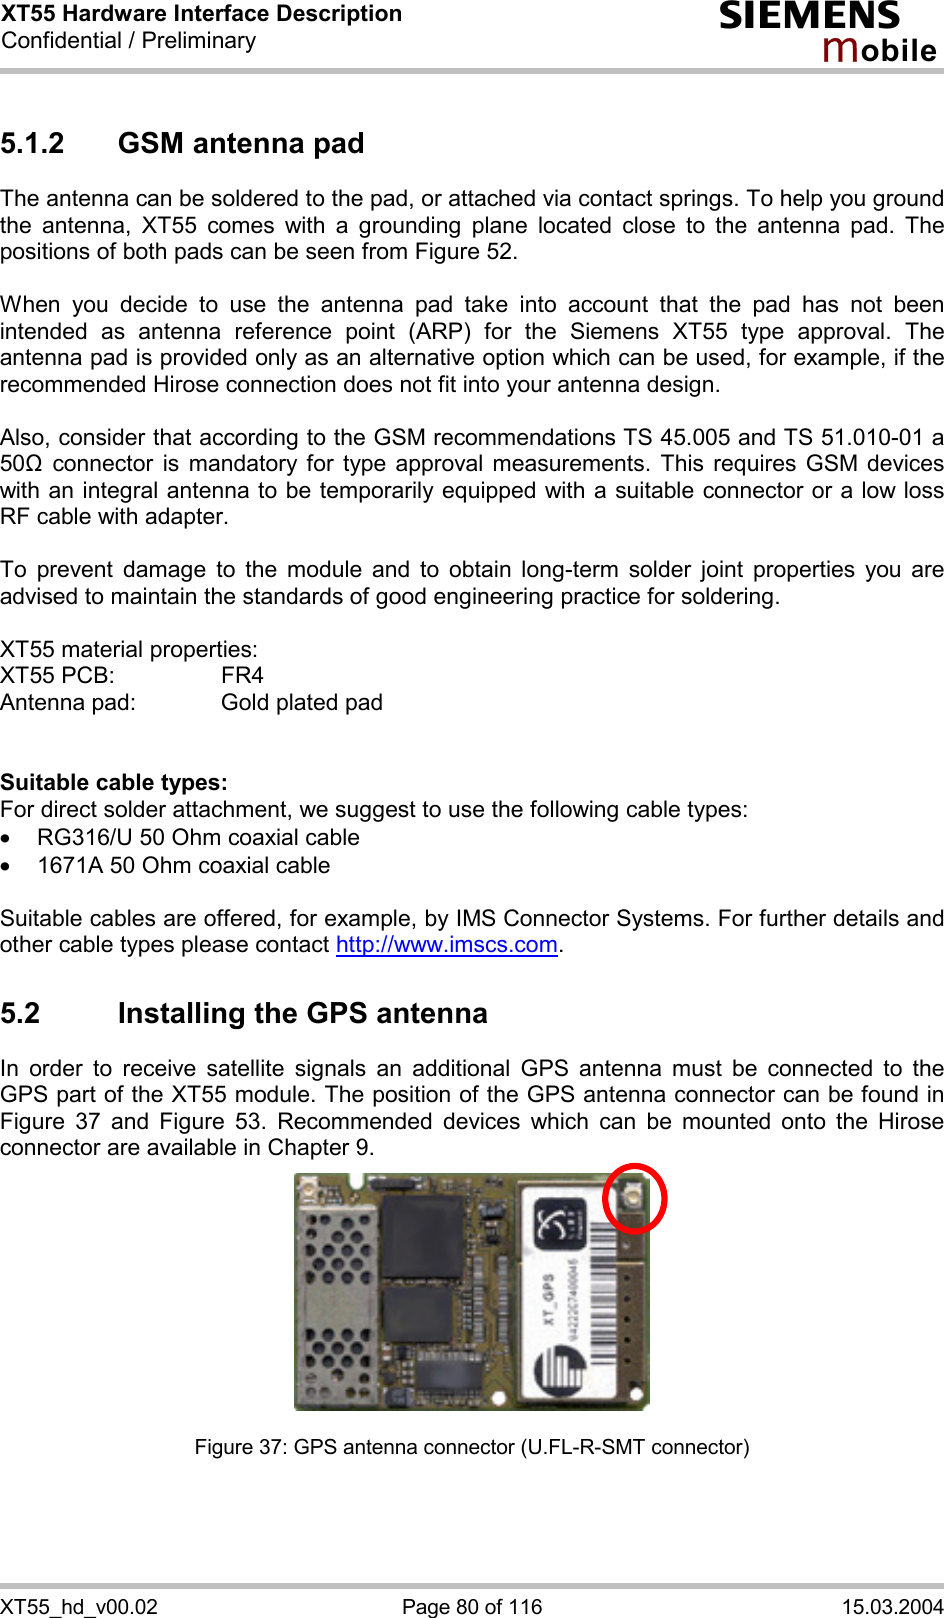 XT55 Hardware Interface Description Confidential / Preliminary s mo b i l e XT55_hd_v00.02  Page 80 of 116  15.03.2004 5.1.2  GSM antenna pad The antenna can be soldered to the pad, or attached via contact springs. To help you ground the antenna, XT55 comes with a grounding plane located close to the antenna pad. The positions of both pads can be seen from Figure 52.  When you decide to use the antenna pad take into account that the pad has not been intended as antenna reference point (ARP) for the Siemens XT55 type approval. The antenna pad is provided only as an alternative option which can be used, for example, if the recommended Hirose connection does not fit into your antenna design.   Also, consider that according to the GSM recommendations TS 45.005 and TS 51.010-01 a 50&quot; connector is mandatory for type approval measurements. This requires GSM devices with an integral antenna to be temporarily equipped with a suitable connector or a low loss RF cable with adapter.   To prevent damage to the module and to obtain long-term solder joint properties you are advised to maintain the standards of good engineering practice for soldering.  XT55 material properties: XT55 PCB:     FR4 Antenna pad:    Gold plated pad   Suitable cable types: For direct solder attachment, we suggest to use the following cable types: ·  RG316/U 50 Ohm coaxial cable  ·  1671A 50 Ohm coaxial cable  Suitable cables are offered, for example, by IMS Connector Systems. For further details and other cable types please contact http://www.imscs.com. 5.2  Installing the GPS antenna In order to receive satellite signals an additional GPS antenna must be connected to the GPS part of the XT55 module. The position of the GPS antenna connector can be found in Figure 37 and Figure 53. Recommended devices which can be mounted onto the Hirose connector are available in Chapter 9.         Figure 37: GPS antenna connector (U.FL-R-SMT connector) 